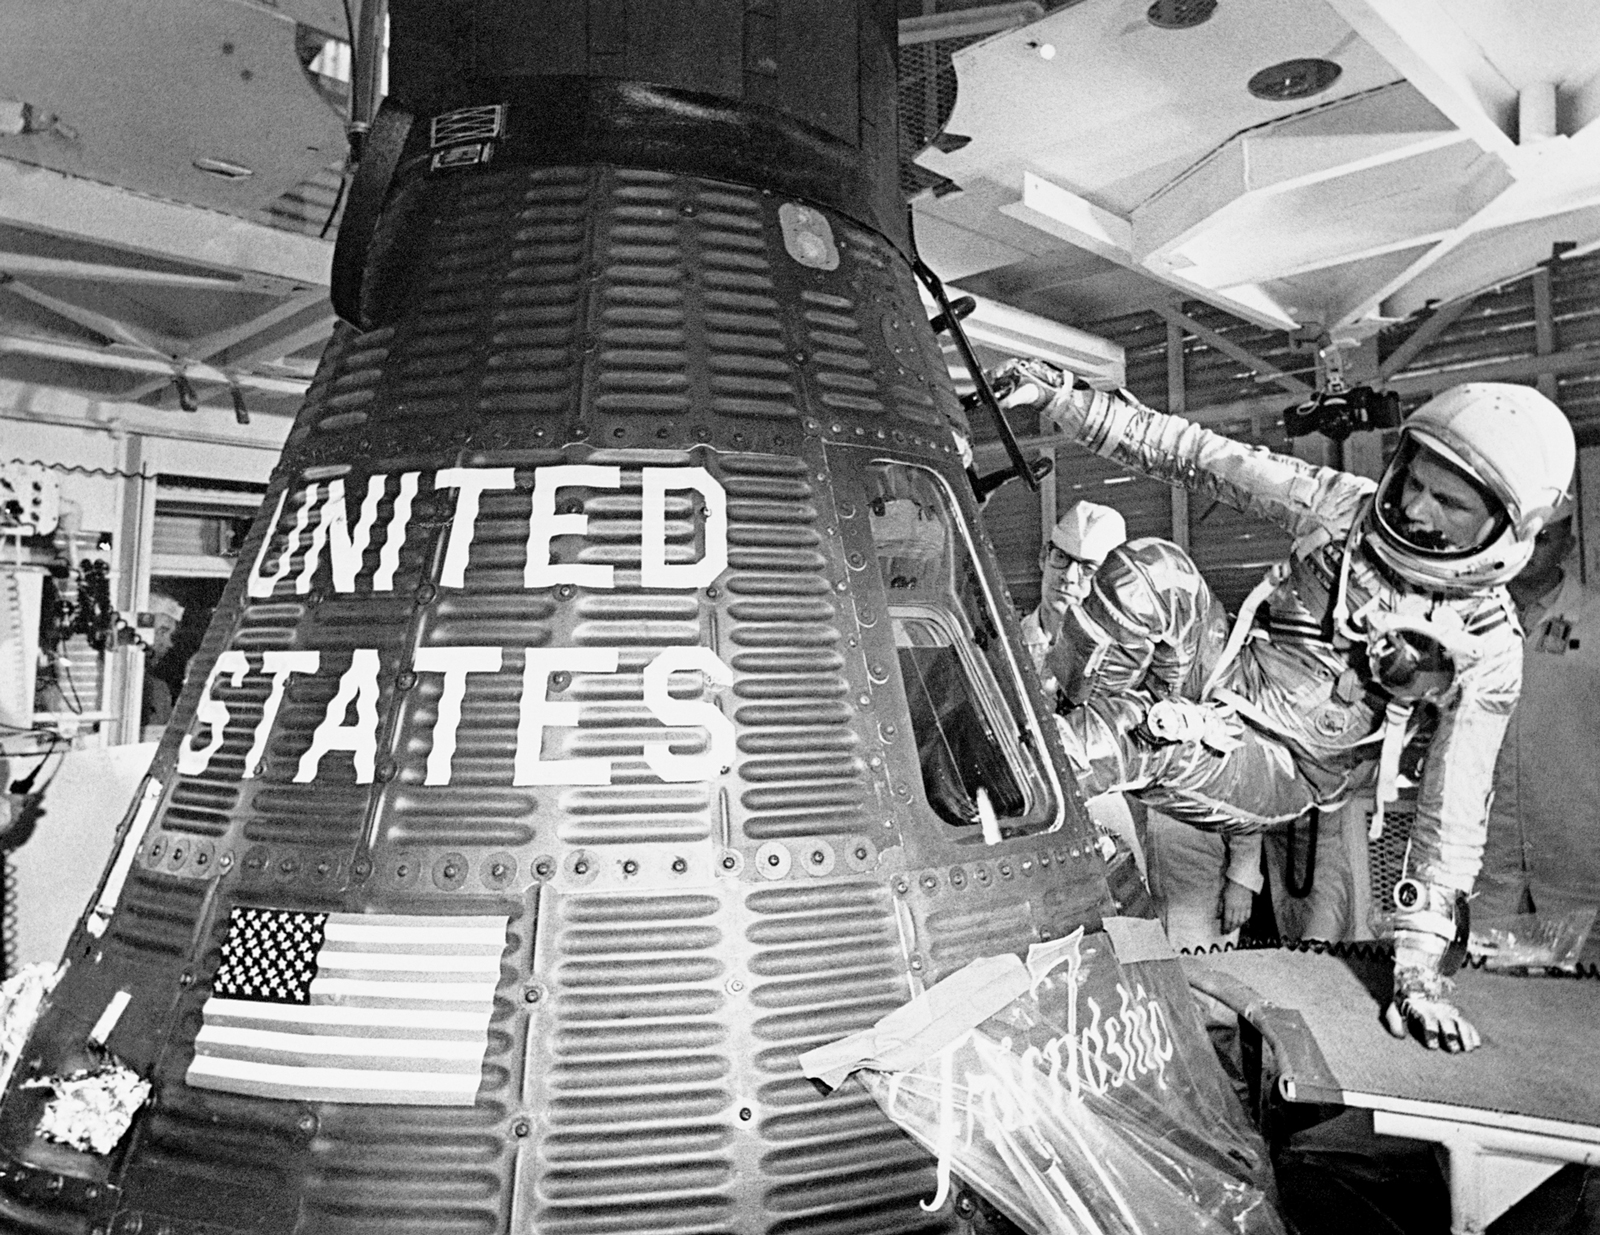 John Glenn boards the Friendship 7 capsule to become the first American to orbit the earth, during the Mercury-Atlas 6) mission, on Feb. 20, 1962. A temporary handle bolted to the outside of the spacecraft made the clumsy maneuver a little easier. (NASA/Space Frontiers/Getty Images)